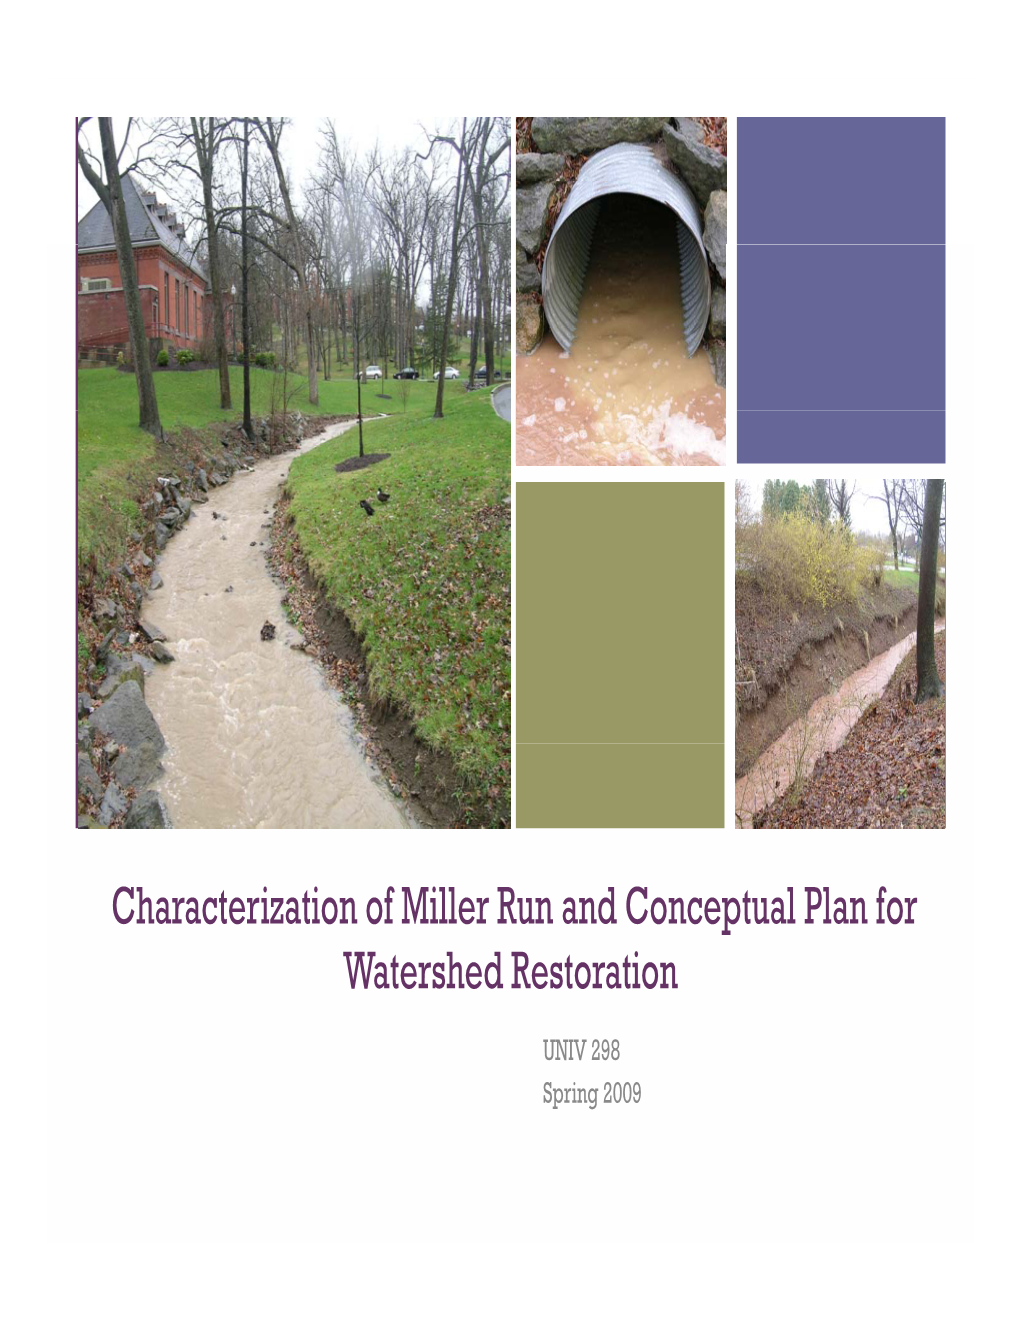 Characterization of Miller Run and Conceptual Plan for Watershed Restoration